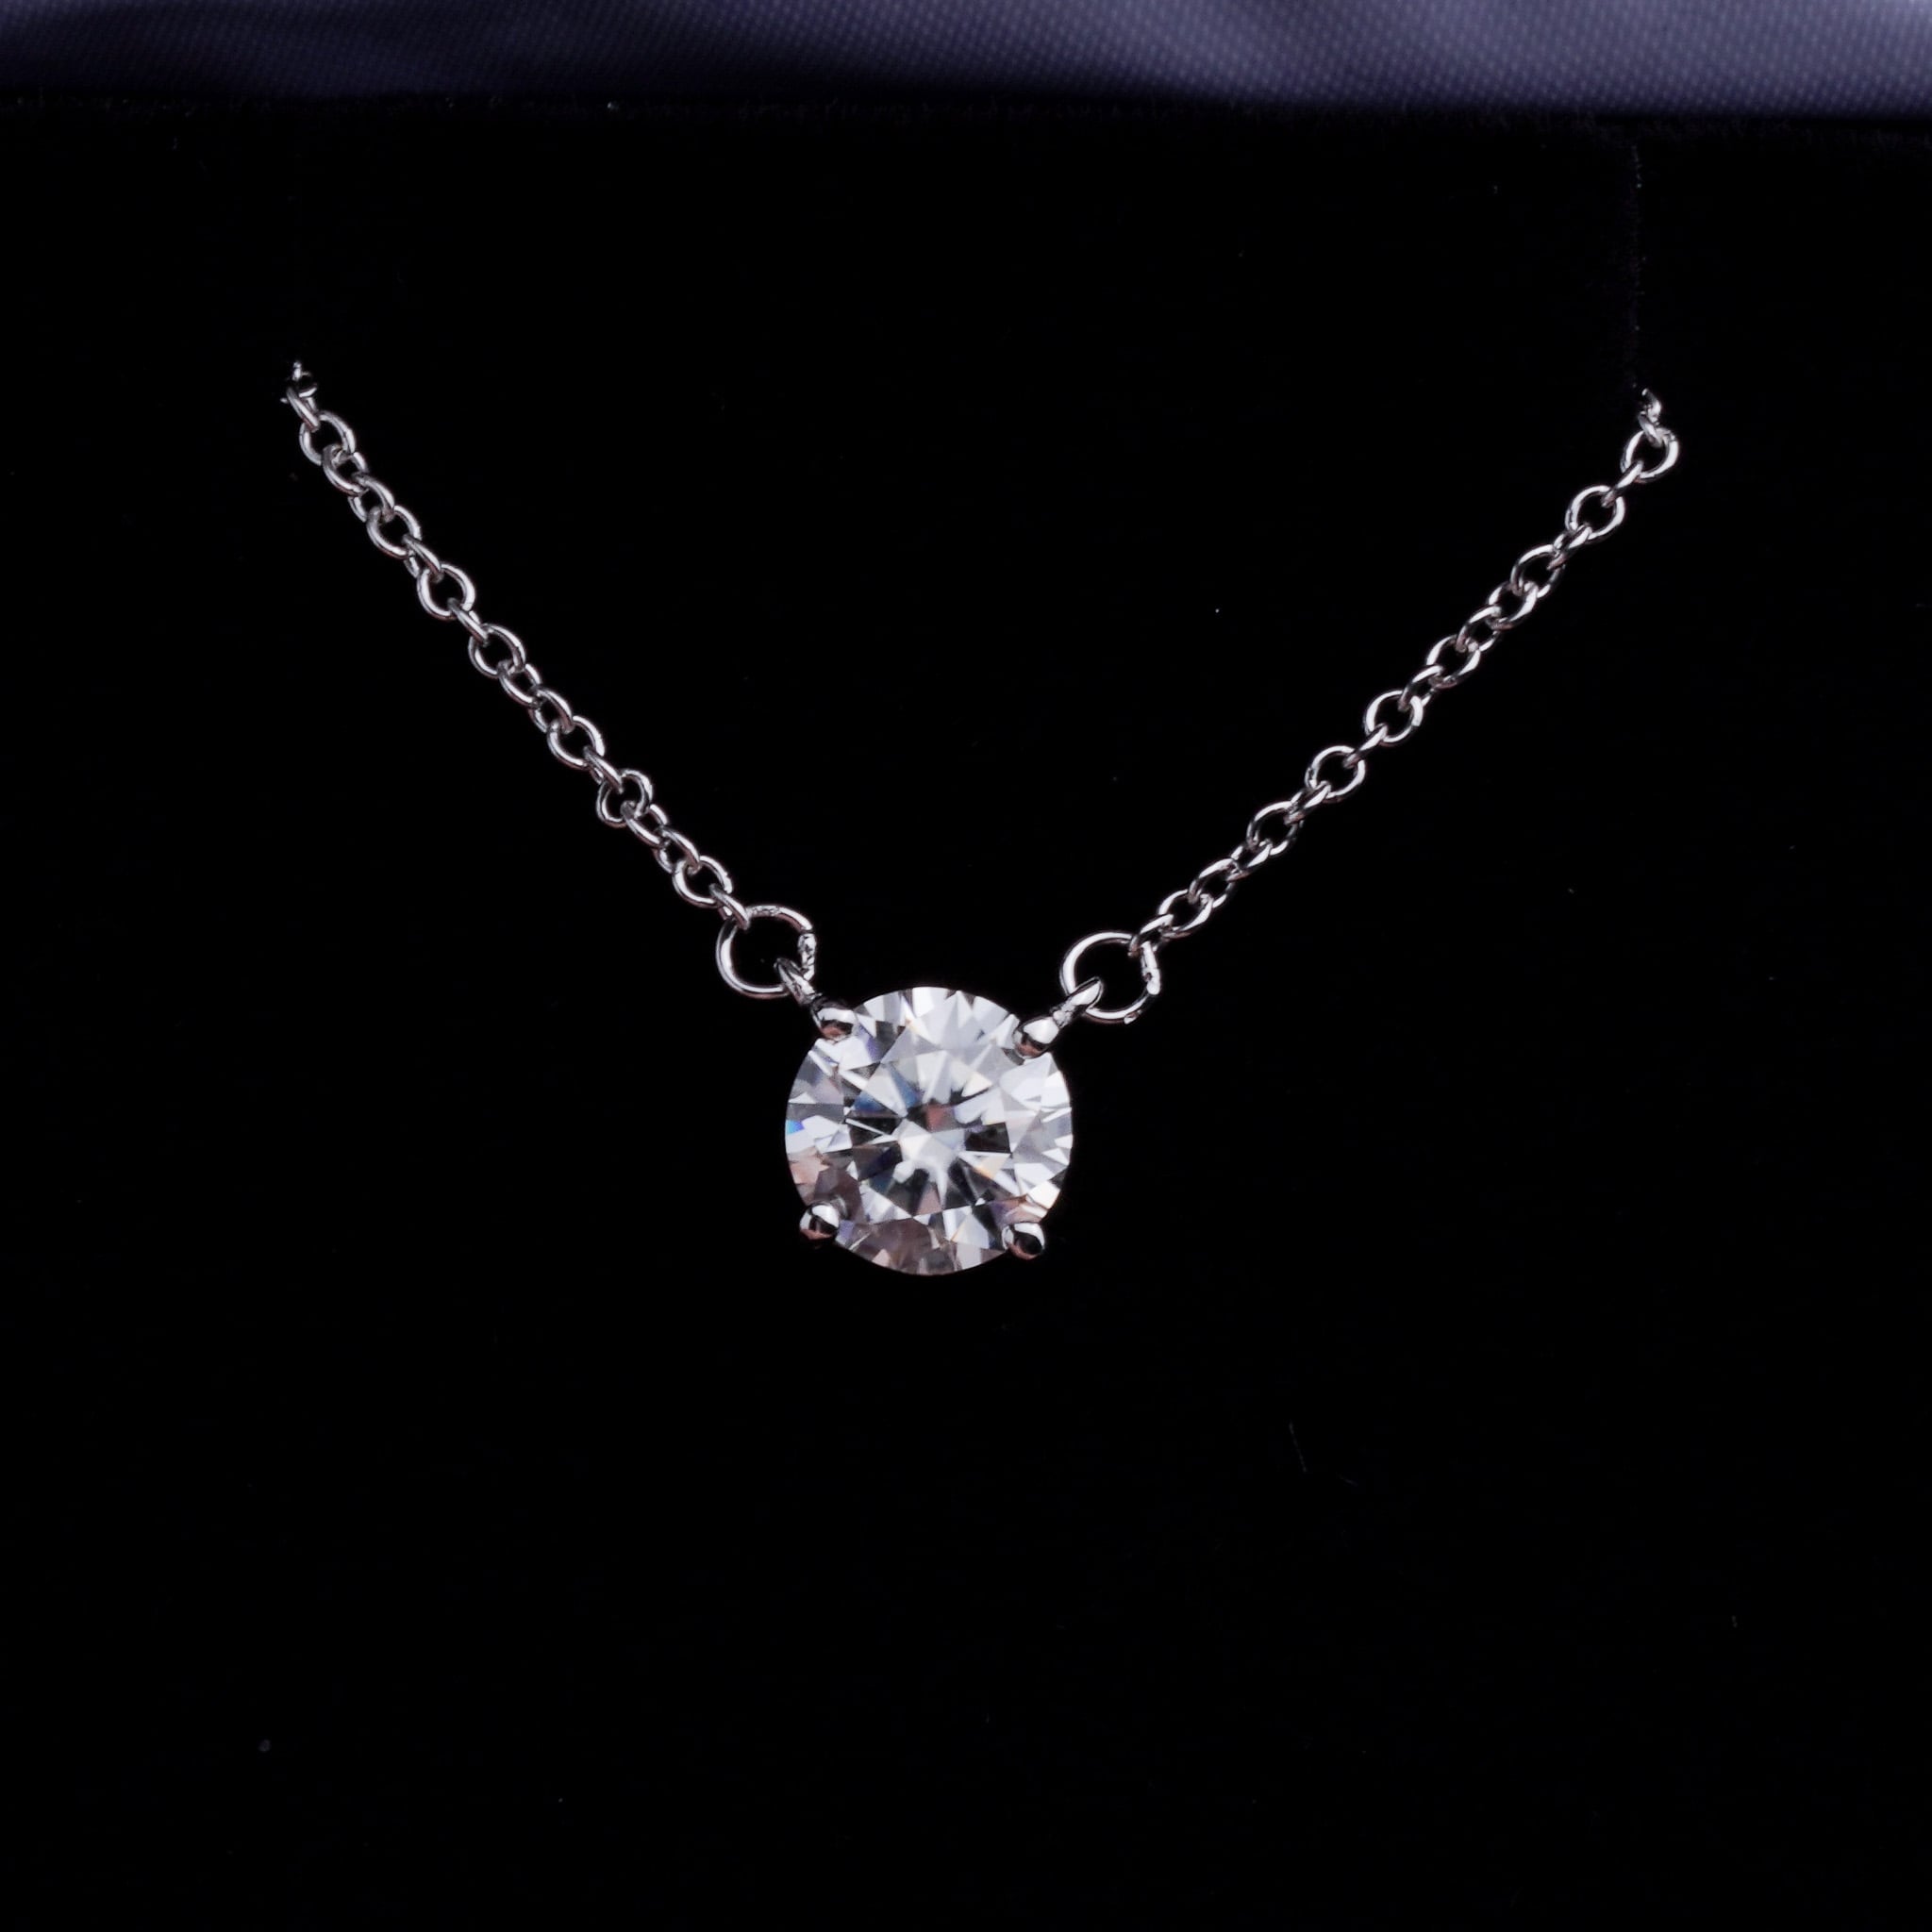 Moissanite Solitaire Necklace - 1 ct